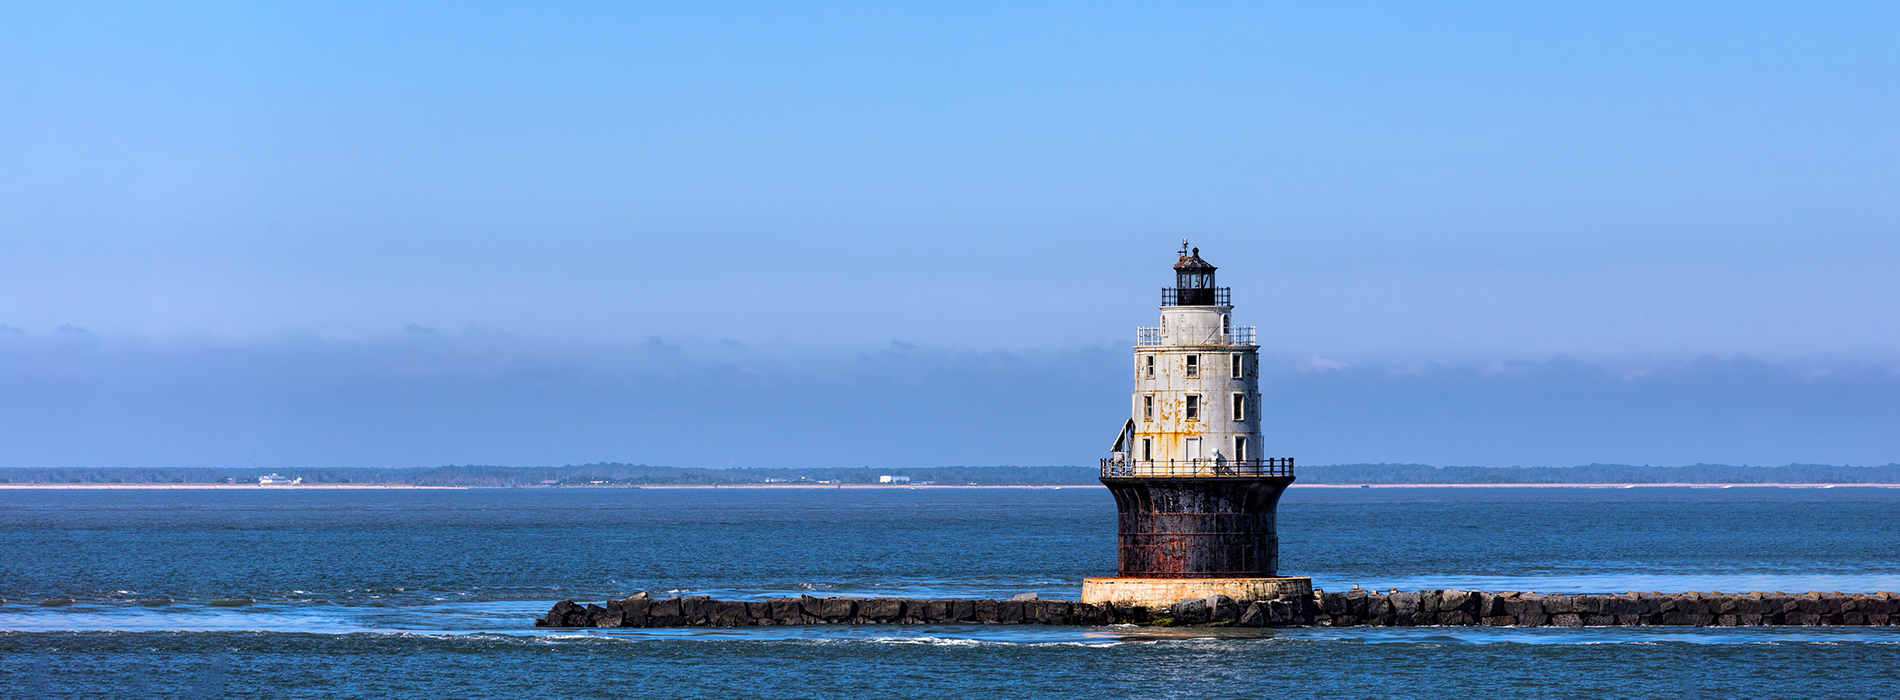 Image of Delaware lighthouse